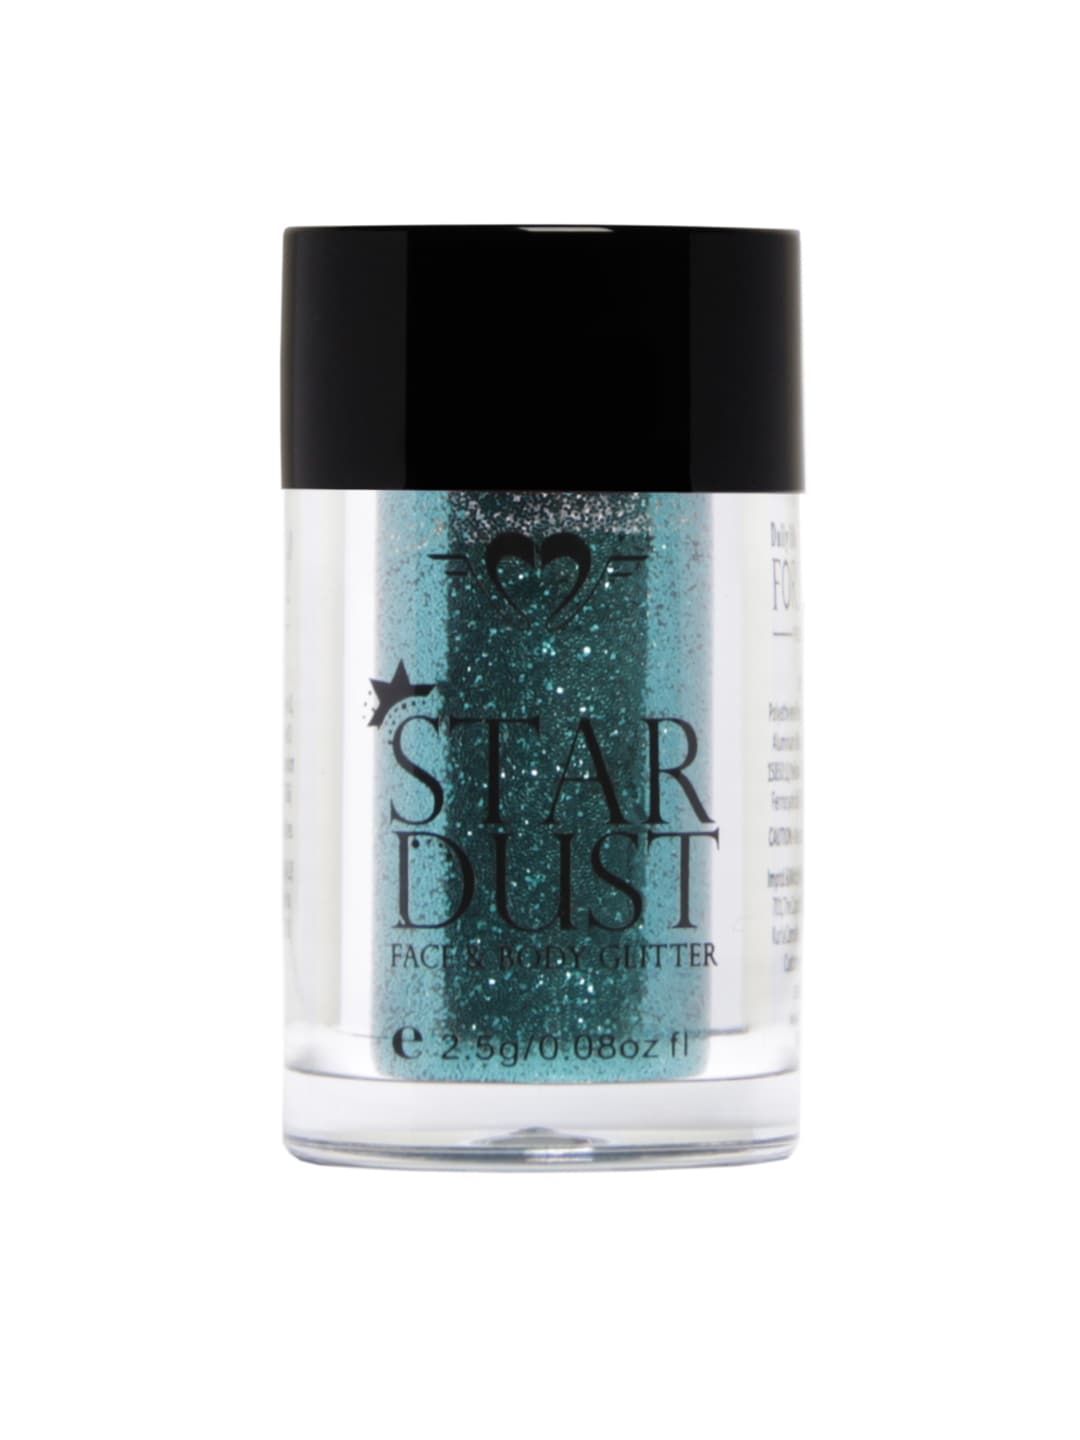 Daily Life Forever52 Star Dust Peacock Crest Face & Body Glitter 2.5 g Price in India